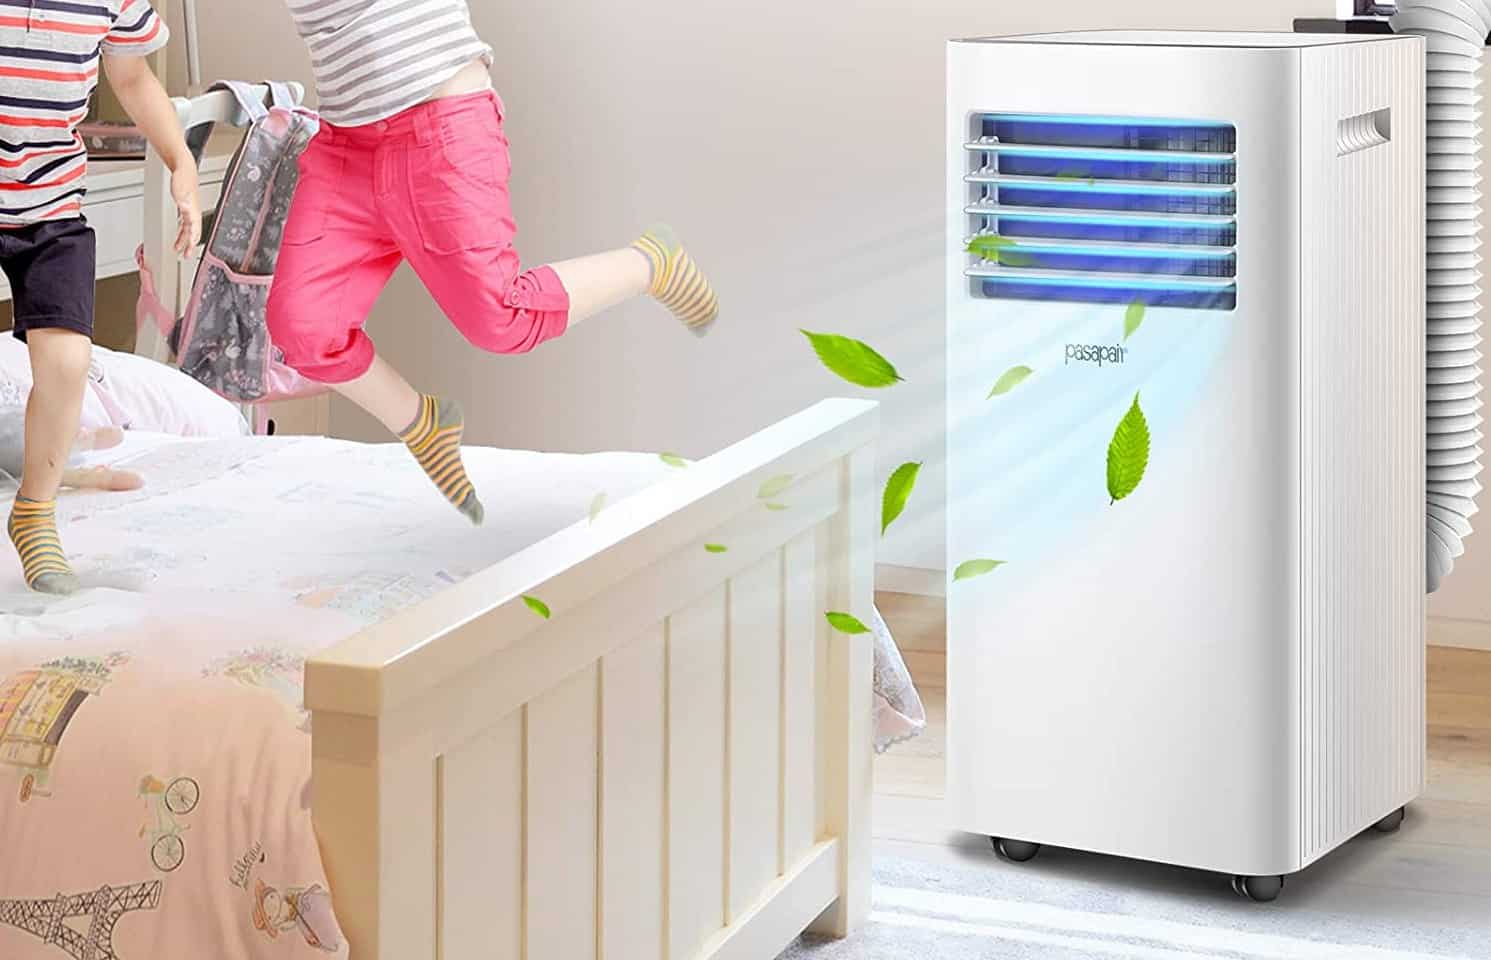 How to Clean Air Conditioner Filters